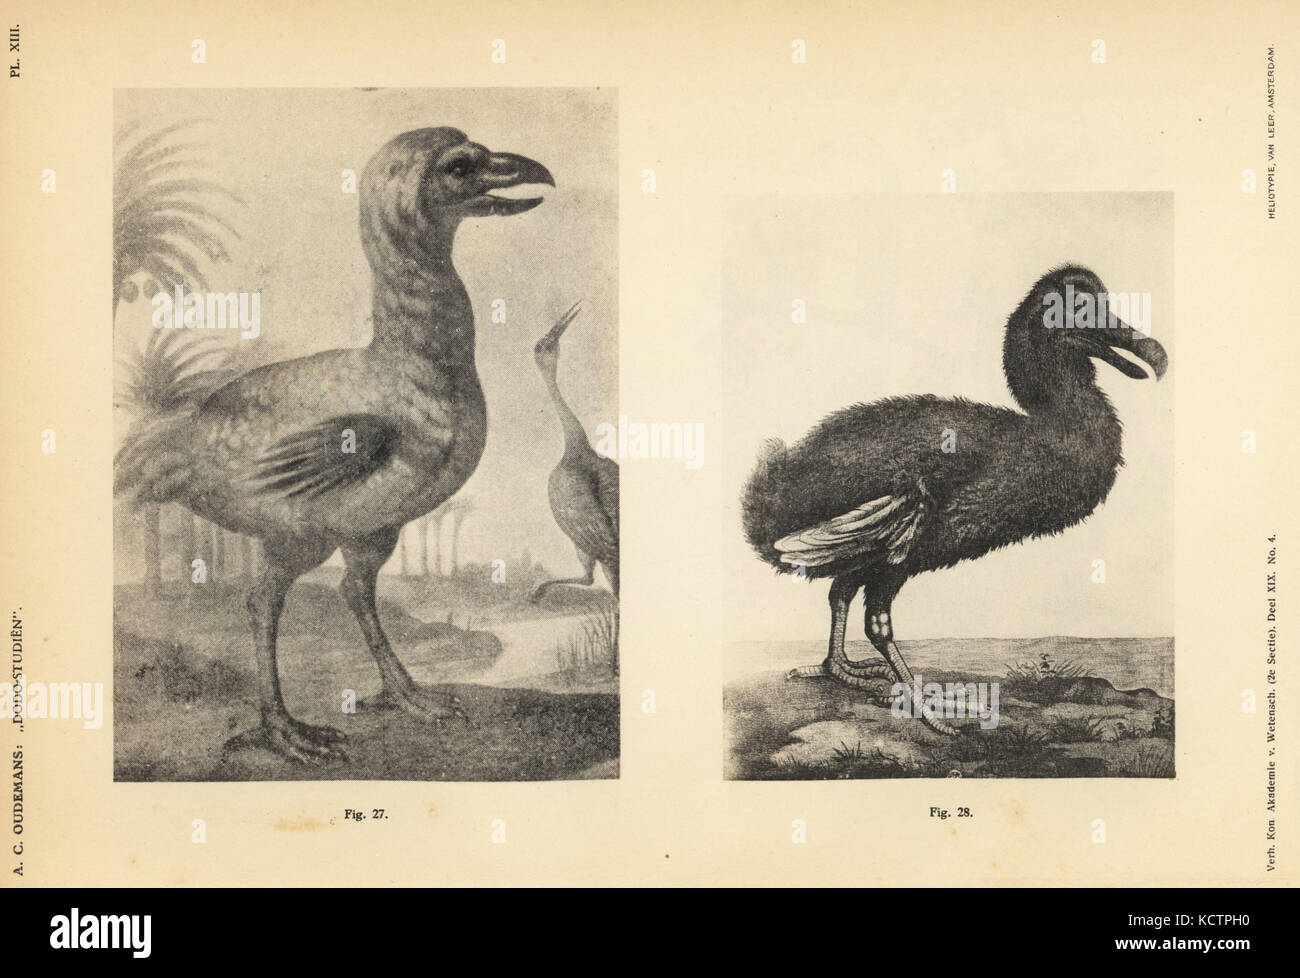 White dodo by Johann Walther, female, 1657 (27) and white dodo by Jacob Hoefnagel, young male, 1609 (28). Heliotype by Van Leer from Dr. Anthonie Cornelis Oudemans' Dodo Studies, Amsterdam, Johannes Muller, 1917. Stock Photo